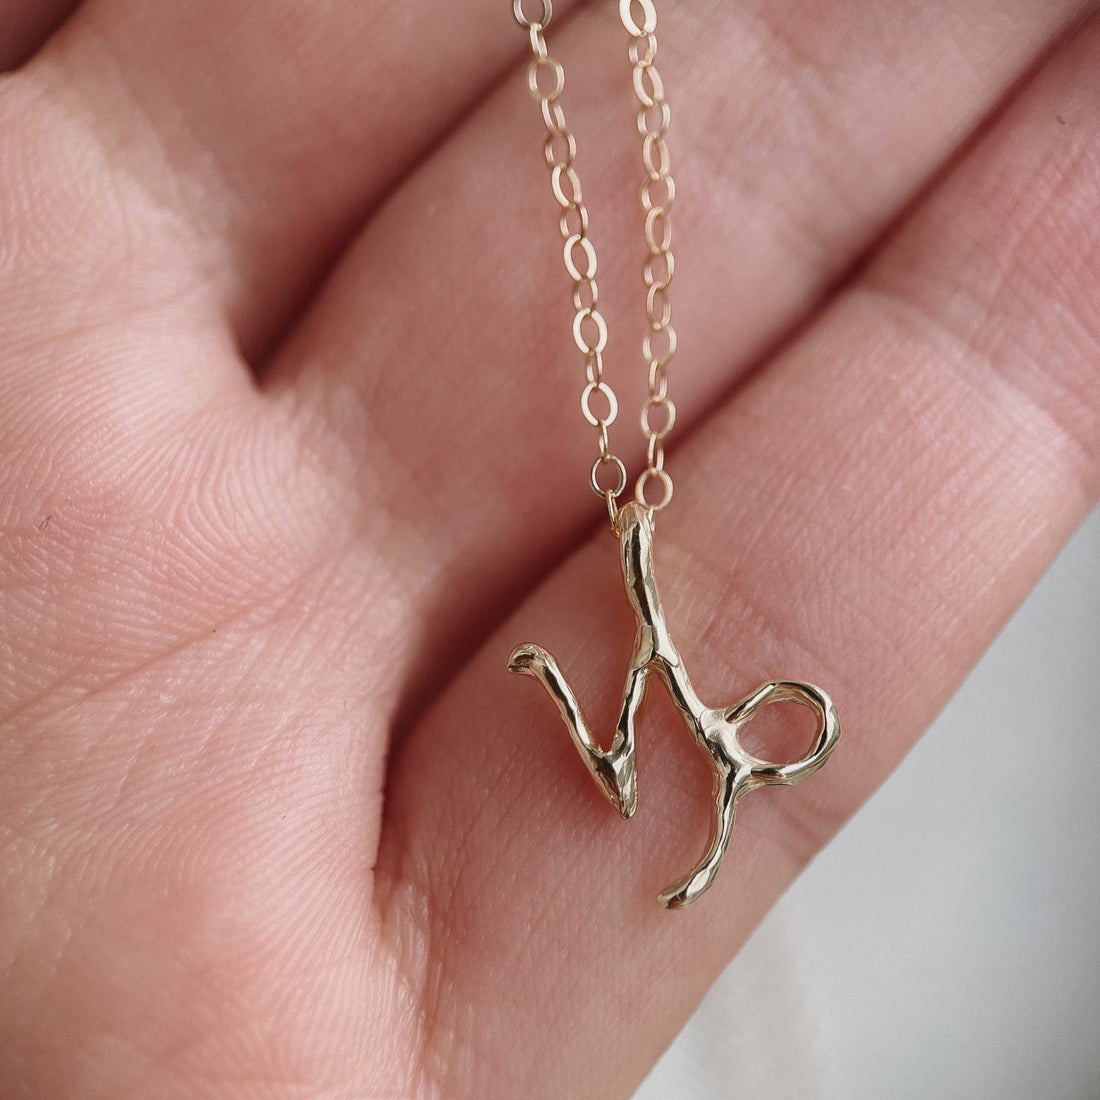 A 14k gold capricorn charm on a cable chain necklace.